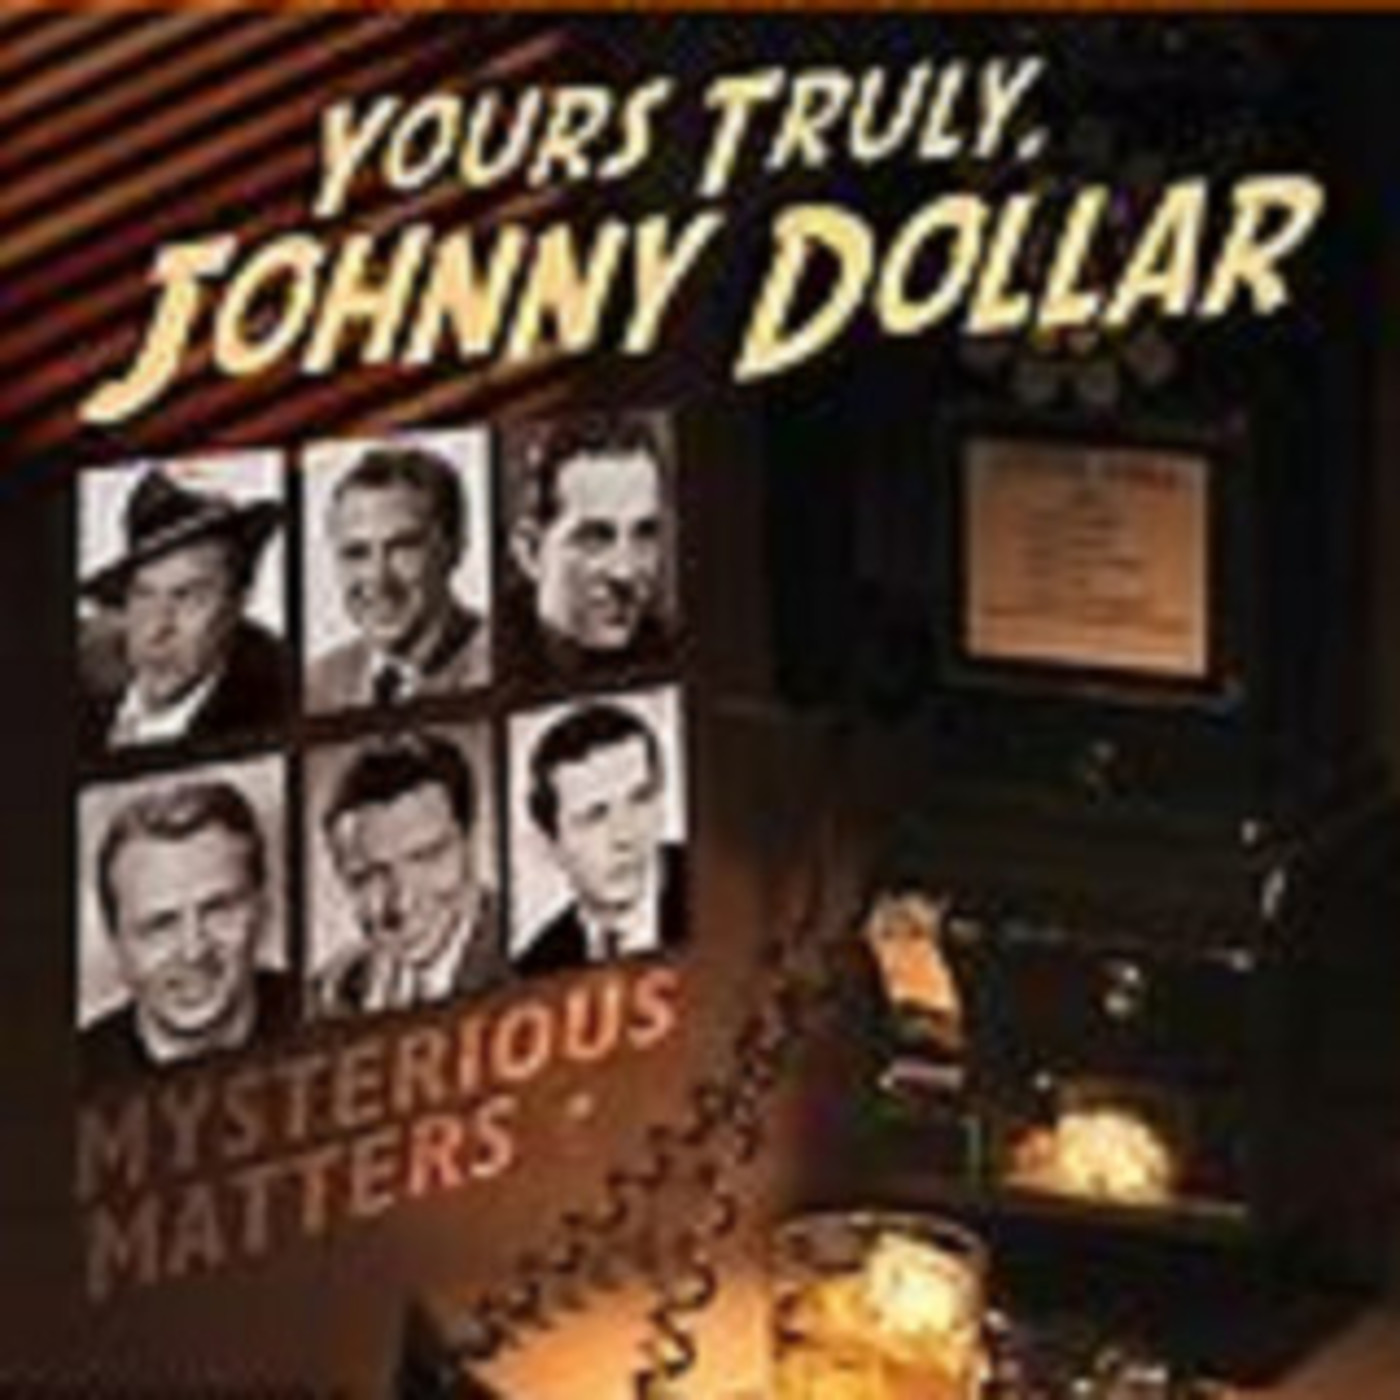 Yours Truly, Johnny Dollar - 021261, episode 727 - The Wayward Fireman Matter